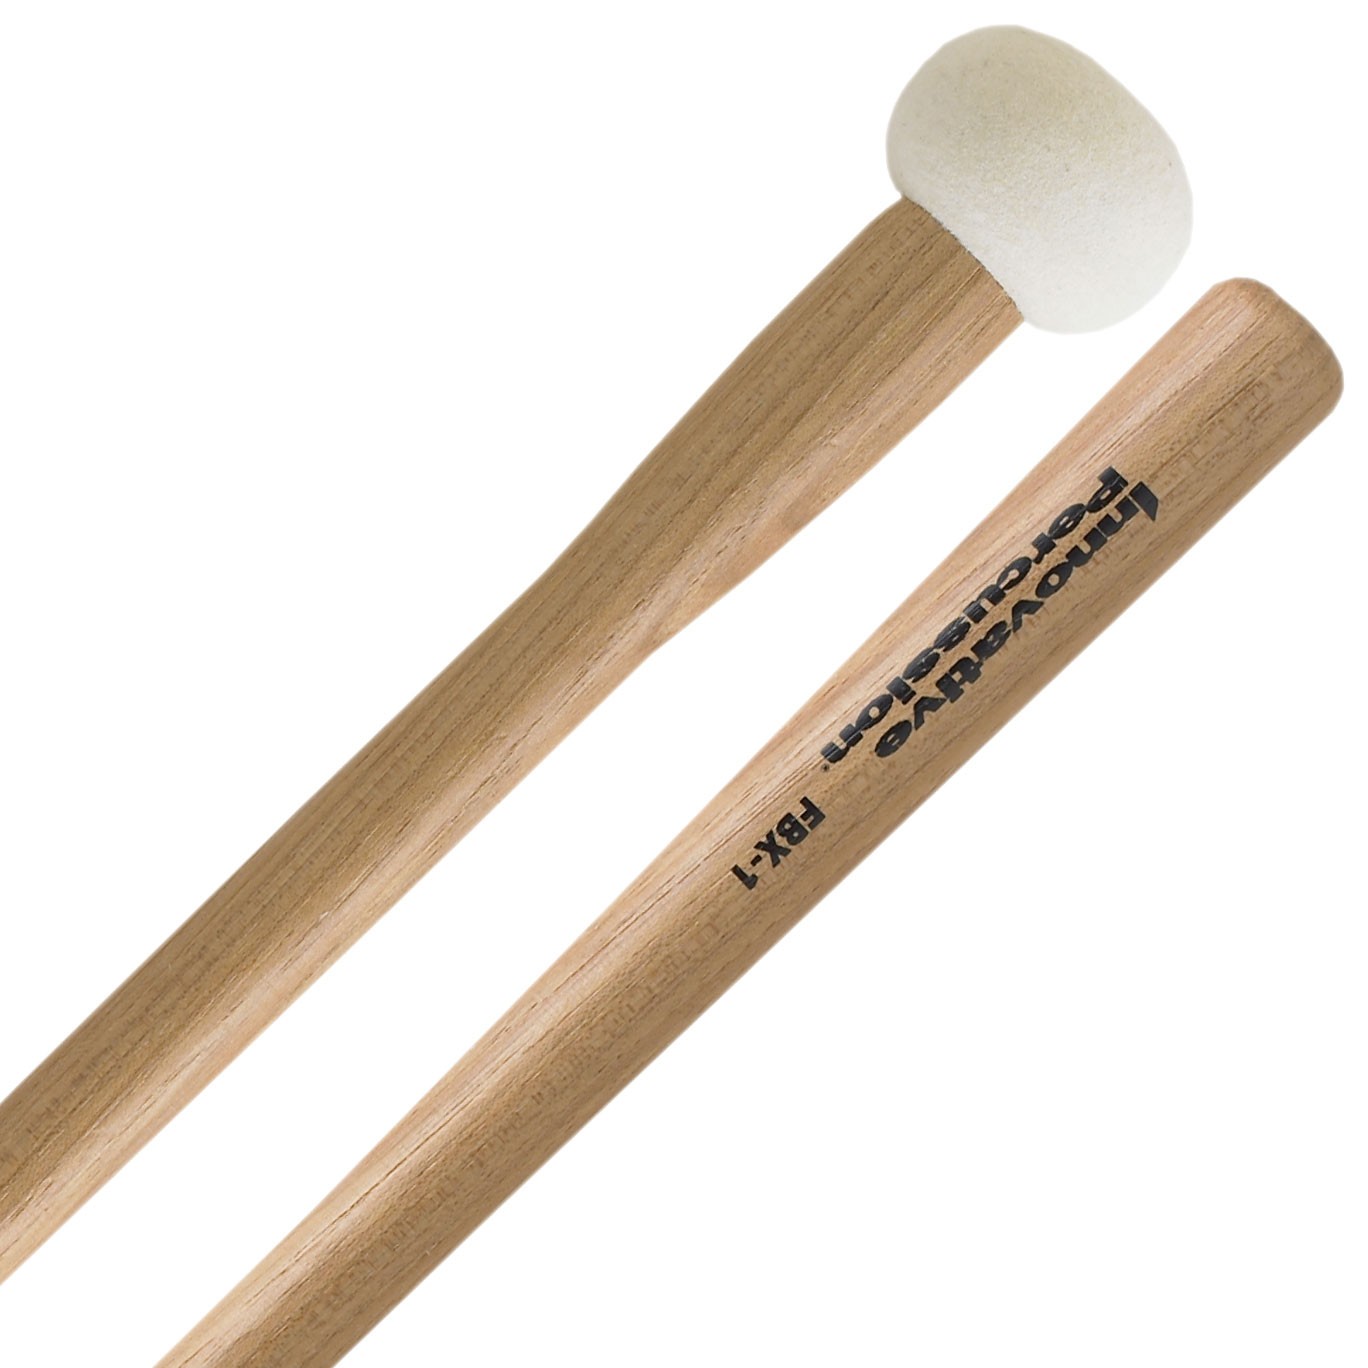 Innovative Percussion FBX-1 Field Series Extra Small Bass Drum Mallets